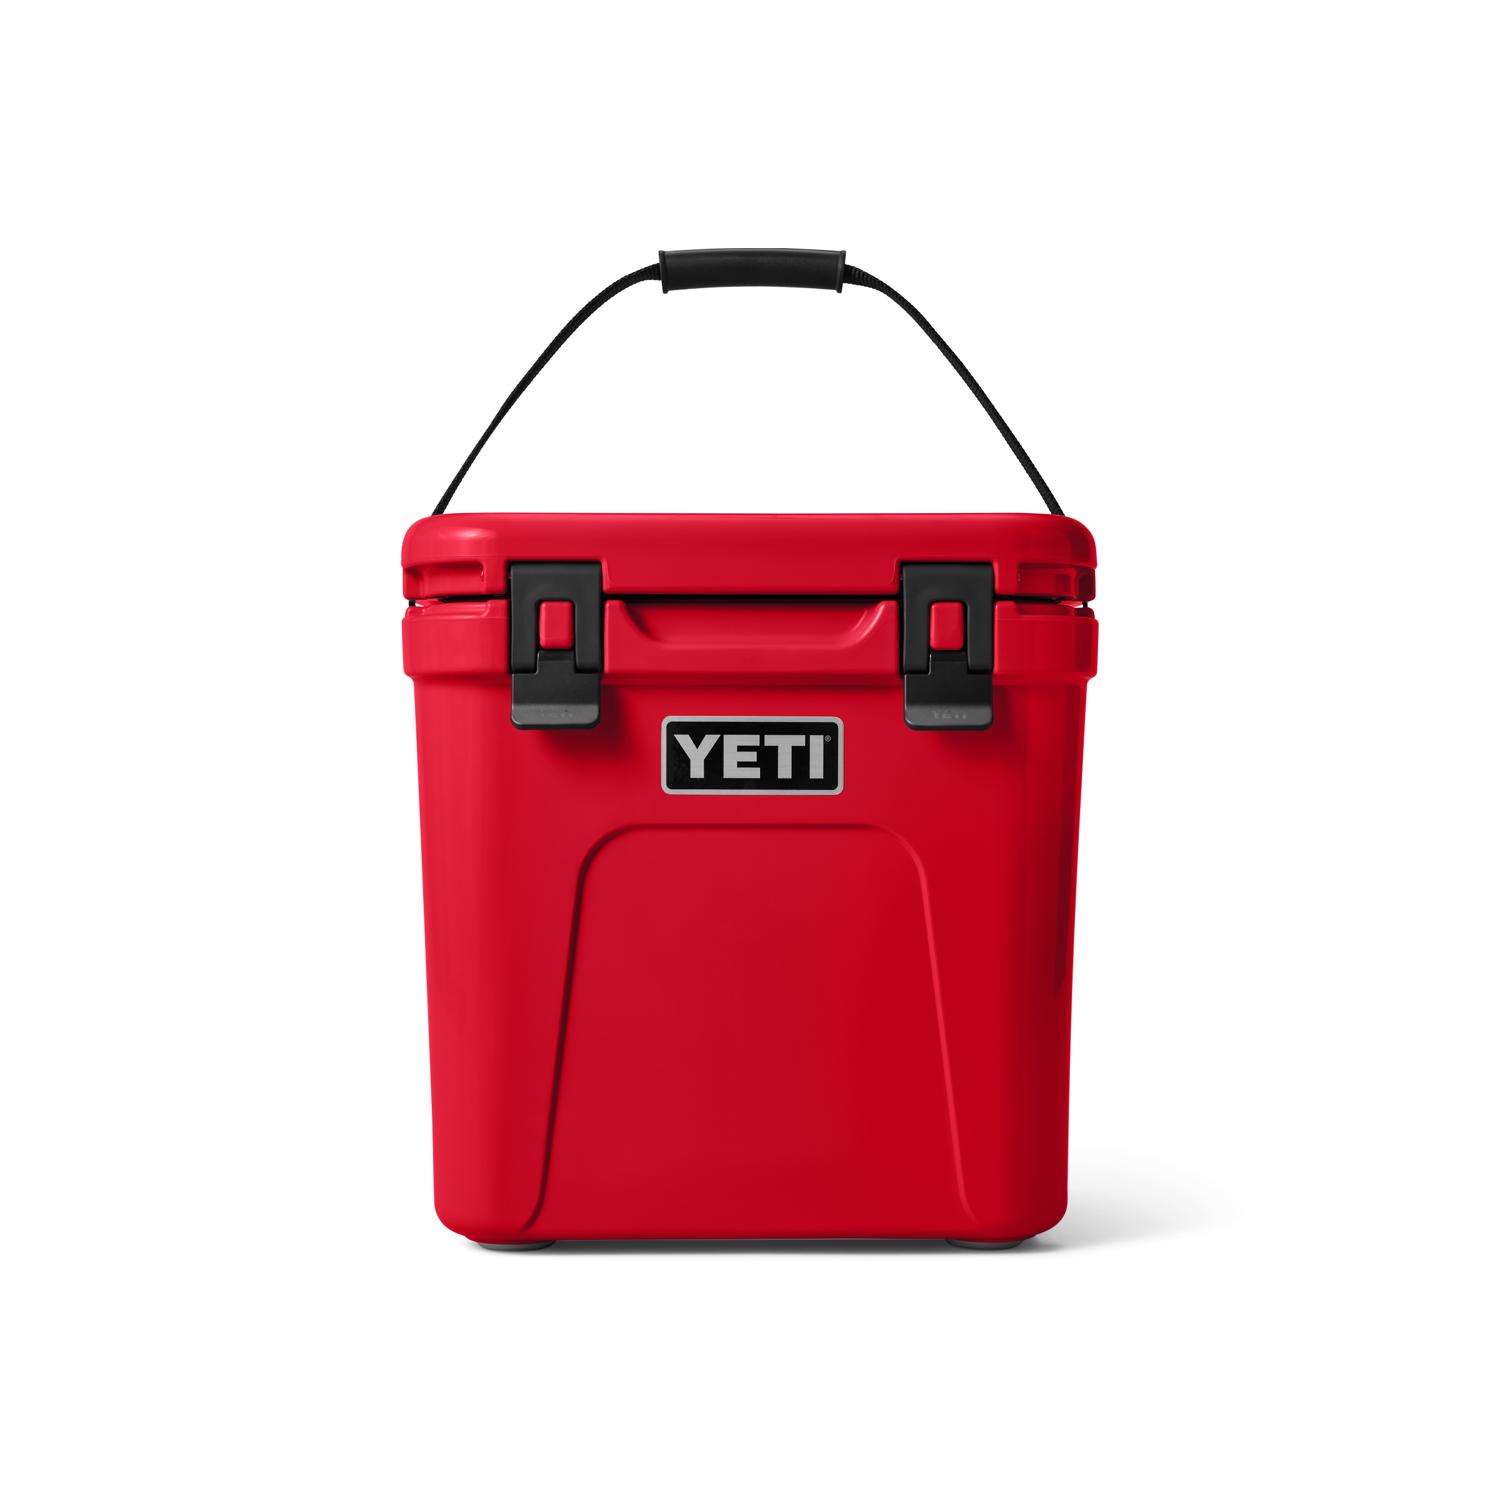 YETI Roadie 24 Rescue Red 22 qt Hard Cooler - Ace Hardware